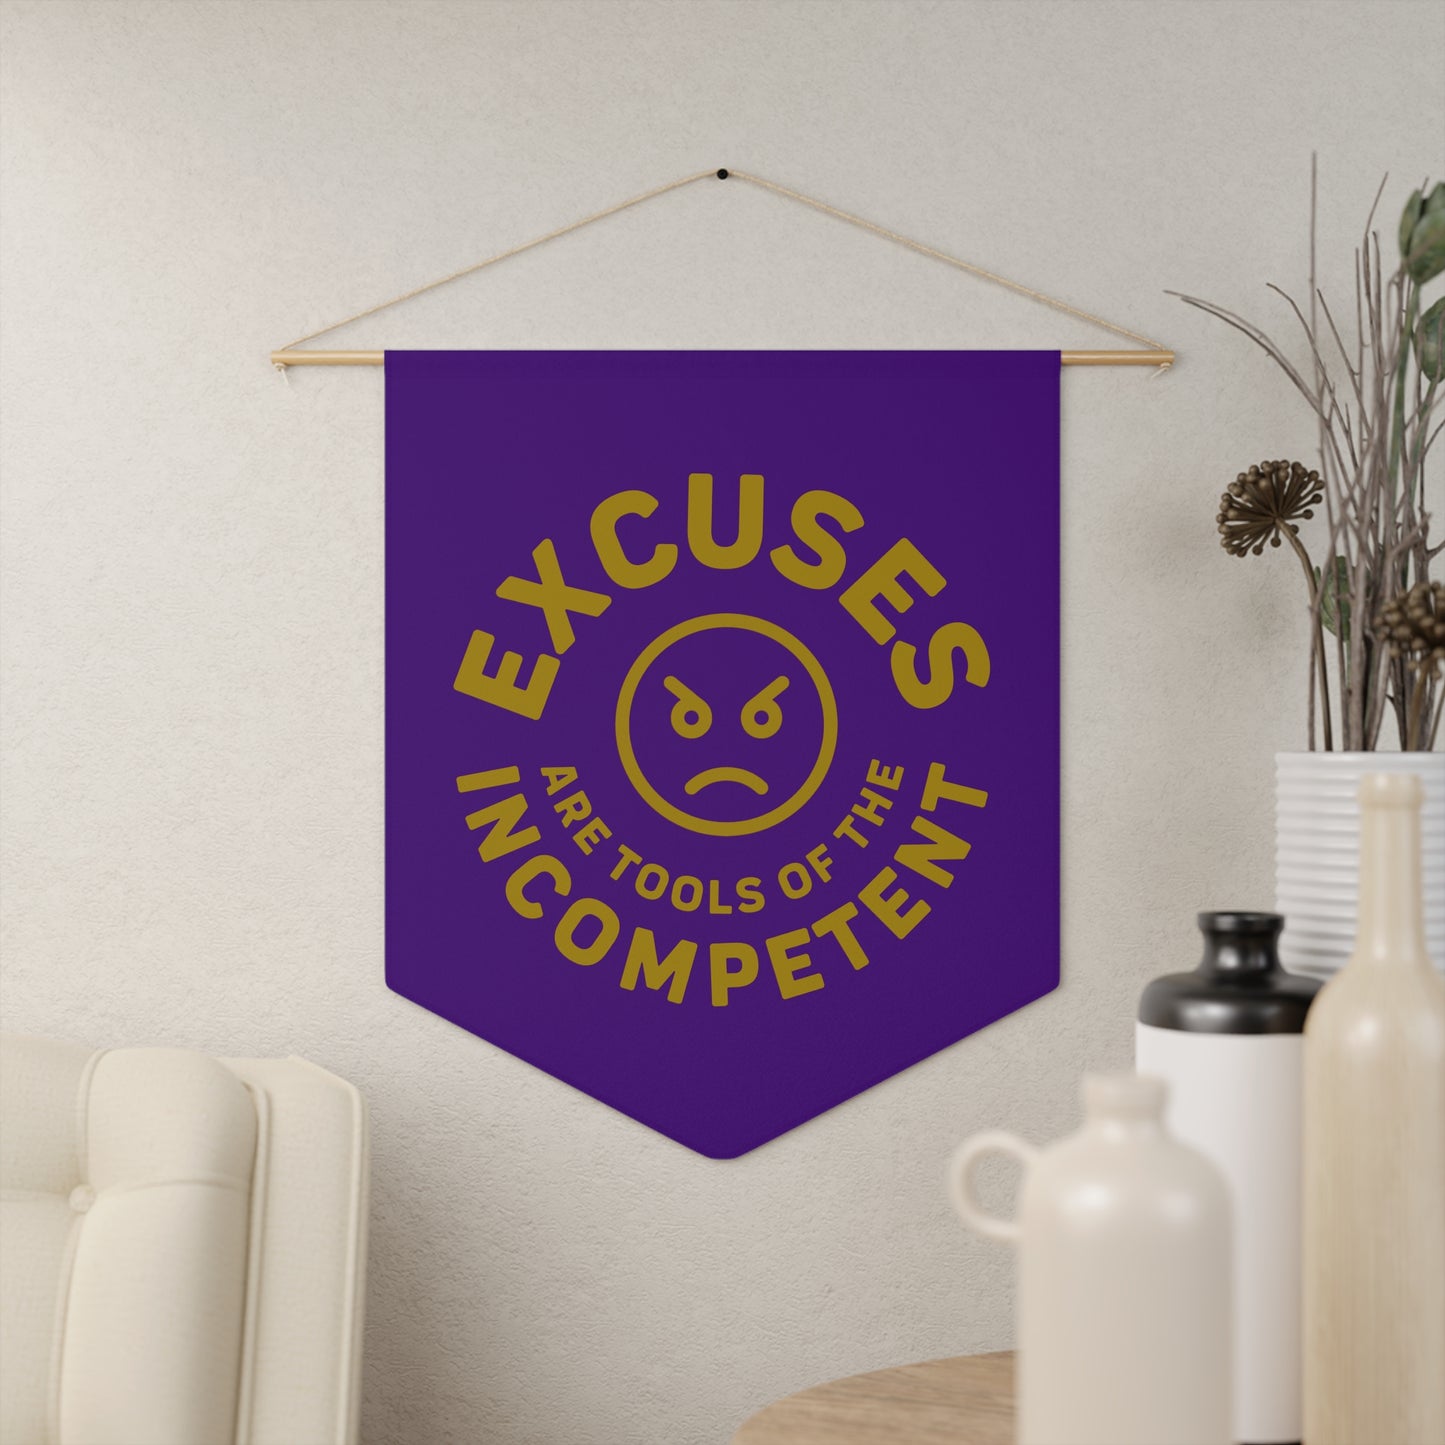 Excuses Pennant - Gold on Purple